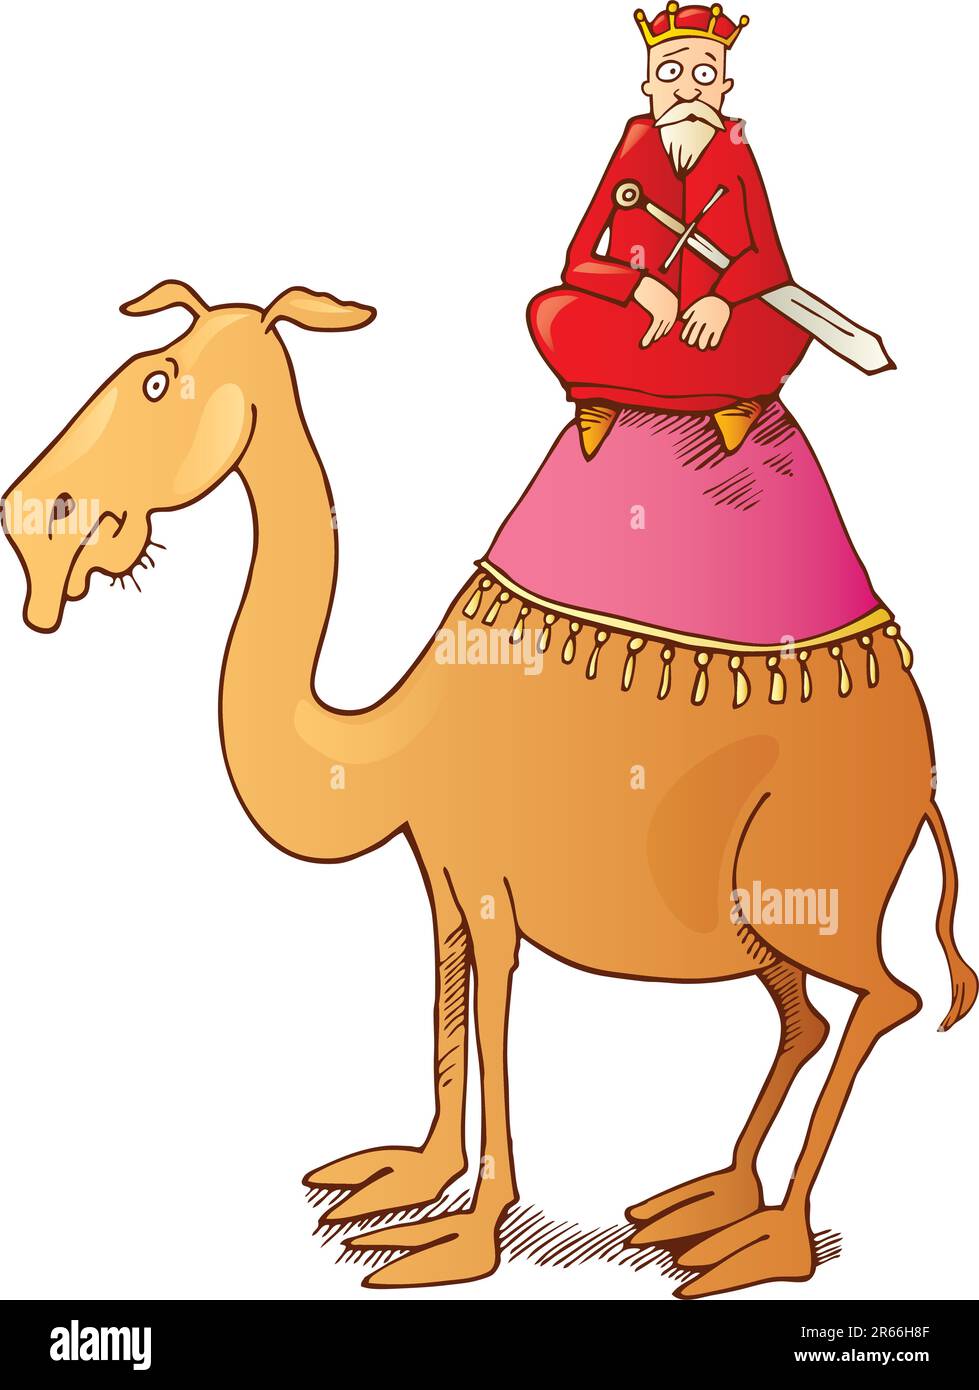 Illustration of one of three kings on camel Stock Vector